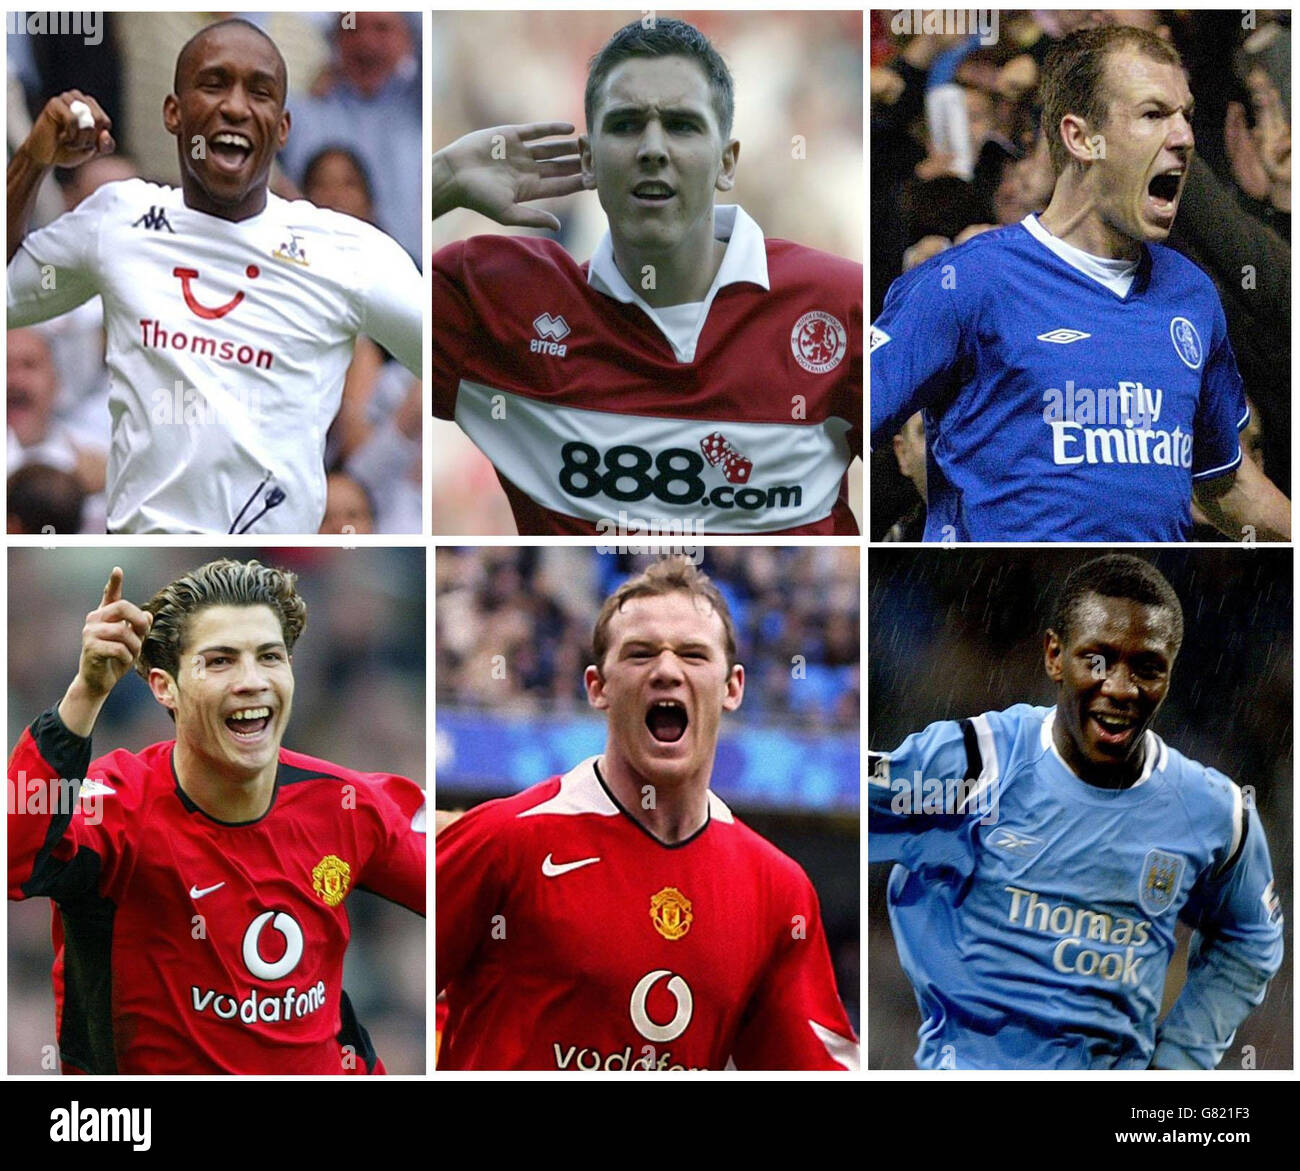 The nominations for the Professional Footballers' Association Young Player of the Year award are; (Top left clockwise) Tottenham's Jermain Defoe, Middlesbrough's Stewart Downing, Chelsea's Arjen Robben, Manchester City's Shaun Wright-Phillips and Manchester United's Wayne Rooney and Cristiano Ronaldo. Stock Photo